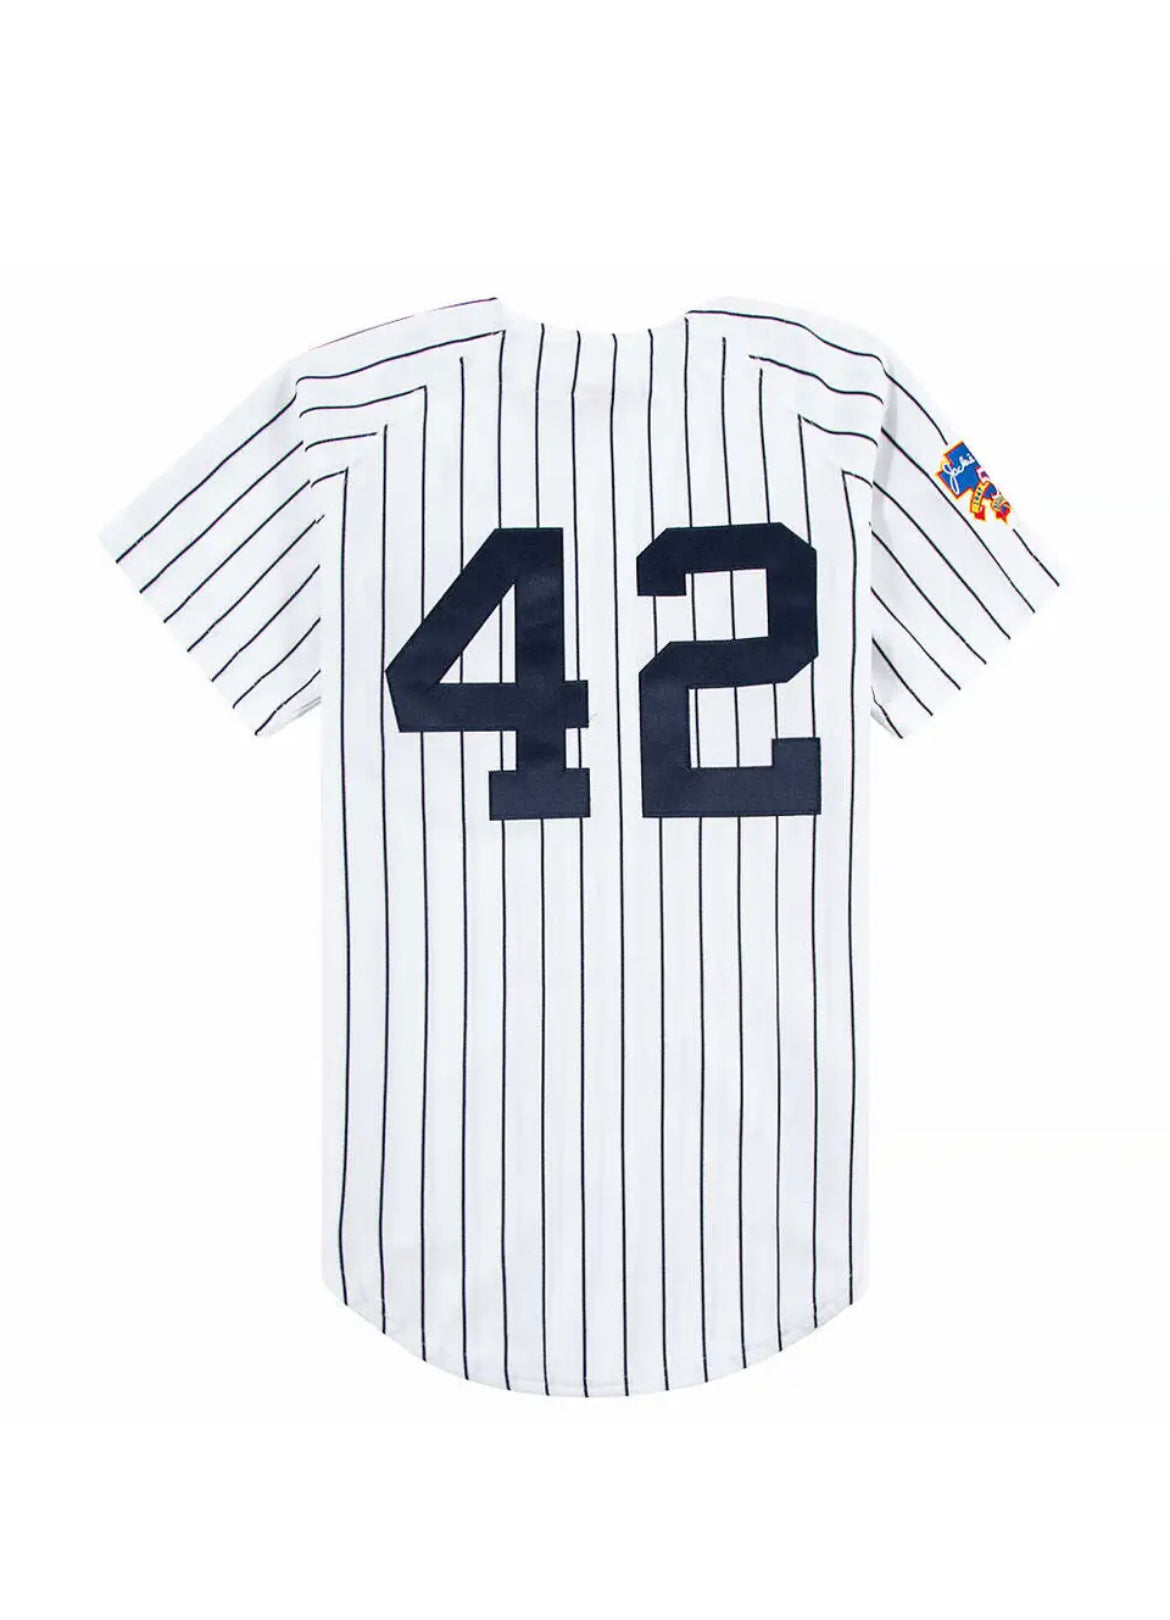 Mariano Rivera Mitchell & Ness Cooperstown Collection Jersey #42  Yankees Sz 3XL